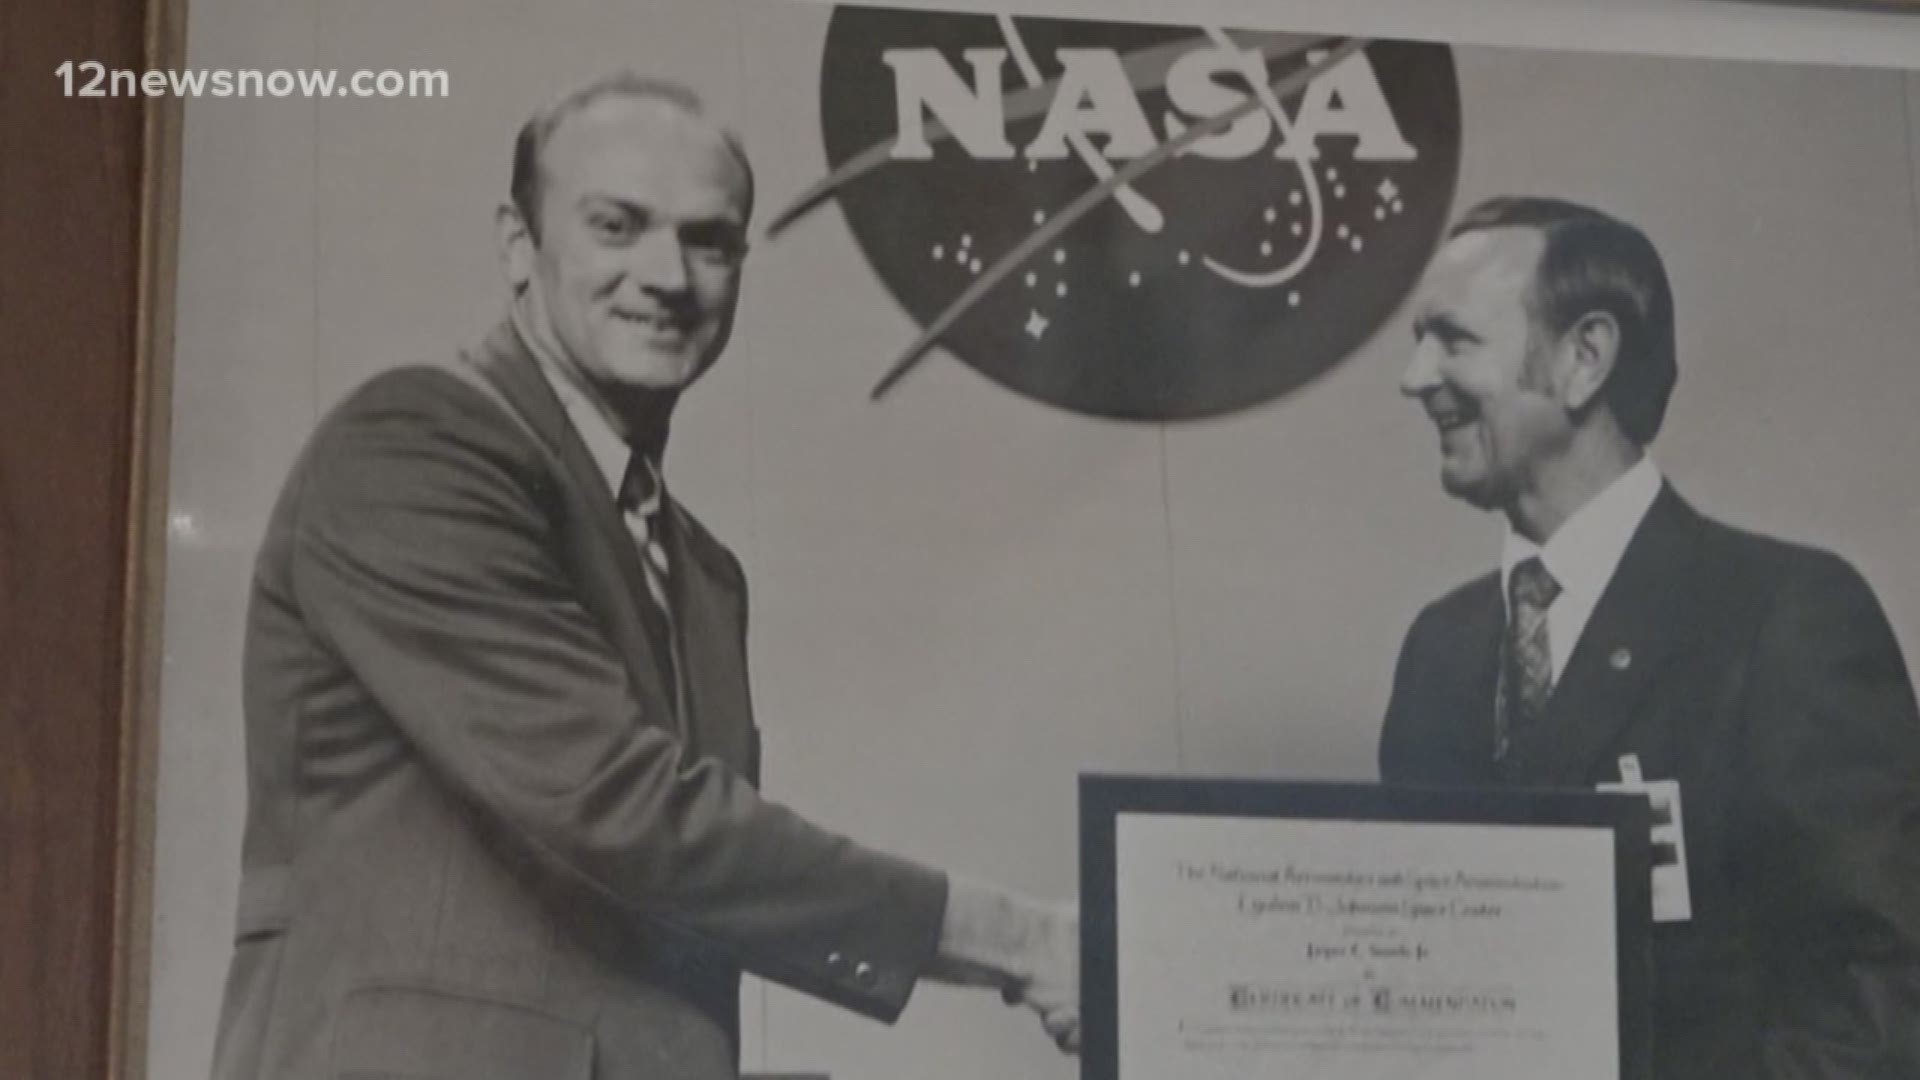 J.C. Smith Jr. worked at NASA for 30 years and helped out with several missions.